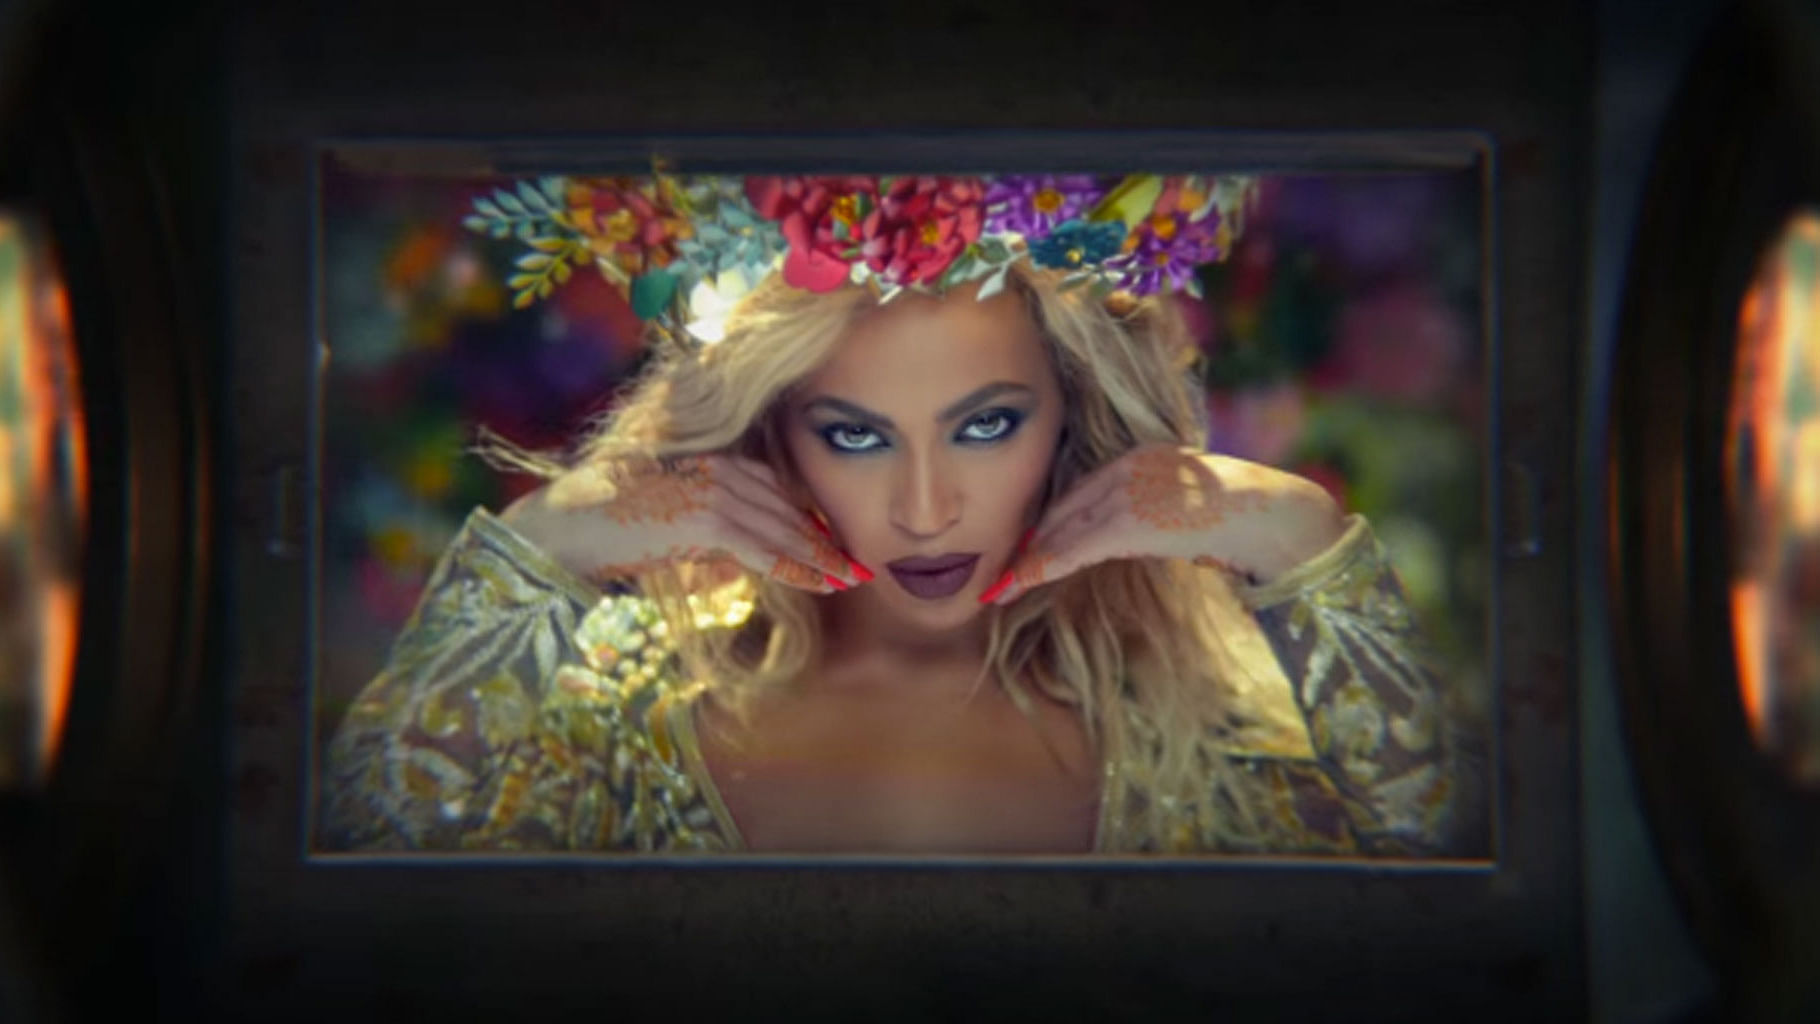 Coldplay’s new video <i>Hymn For The Weekend</i>, which we think also features Sonam Kapoor (Photo courtesy: YouTube)